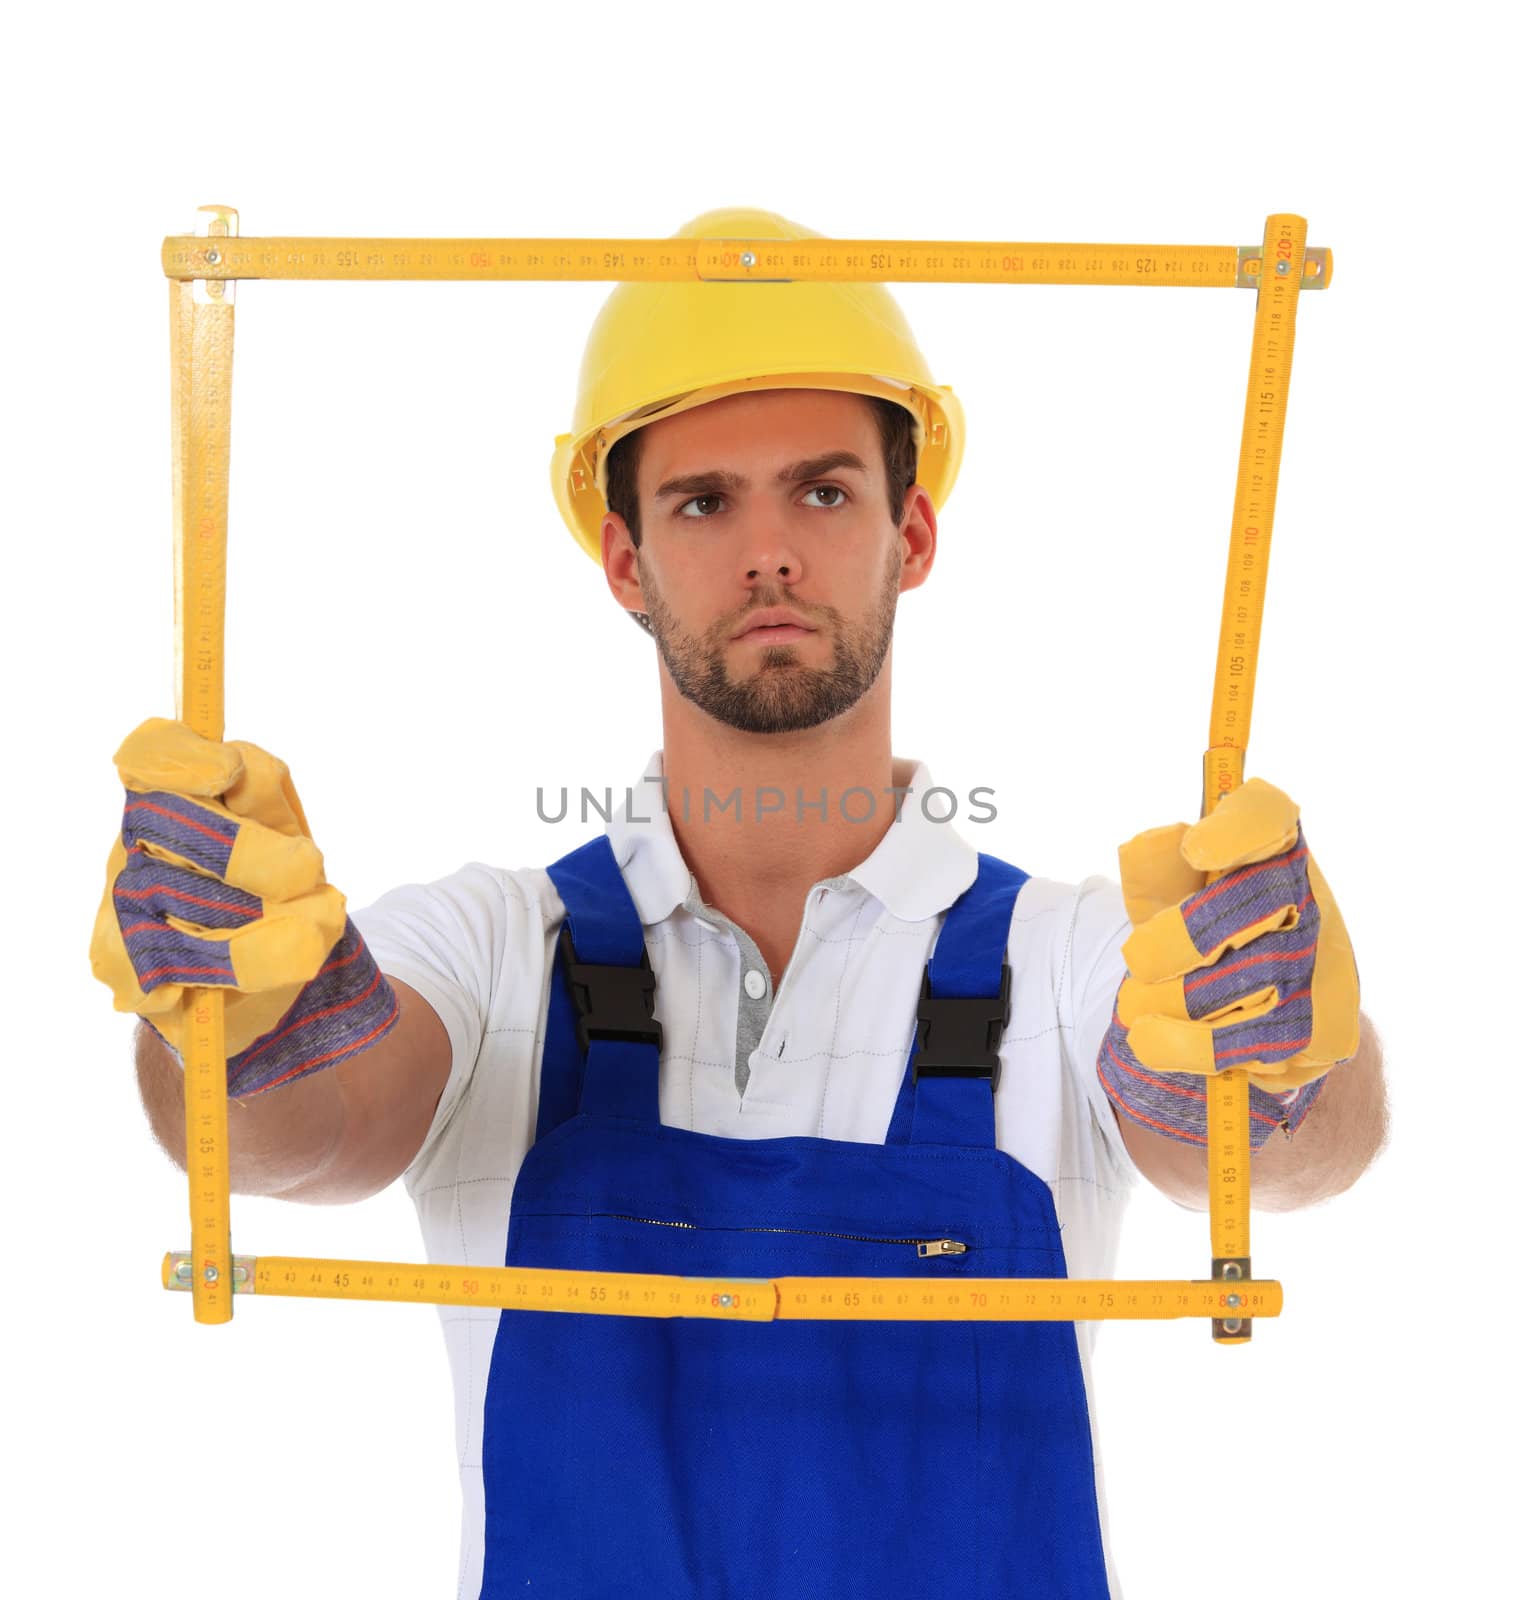 Construction worker holding folding rule. All on white background.